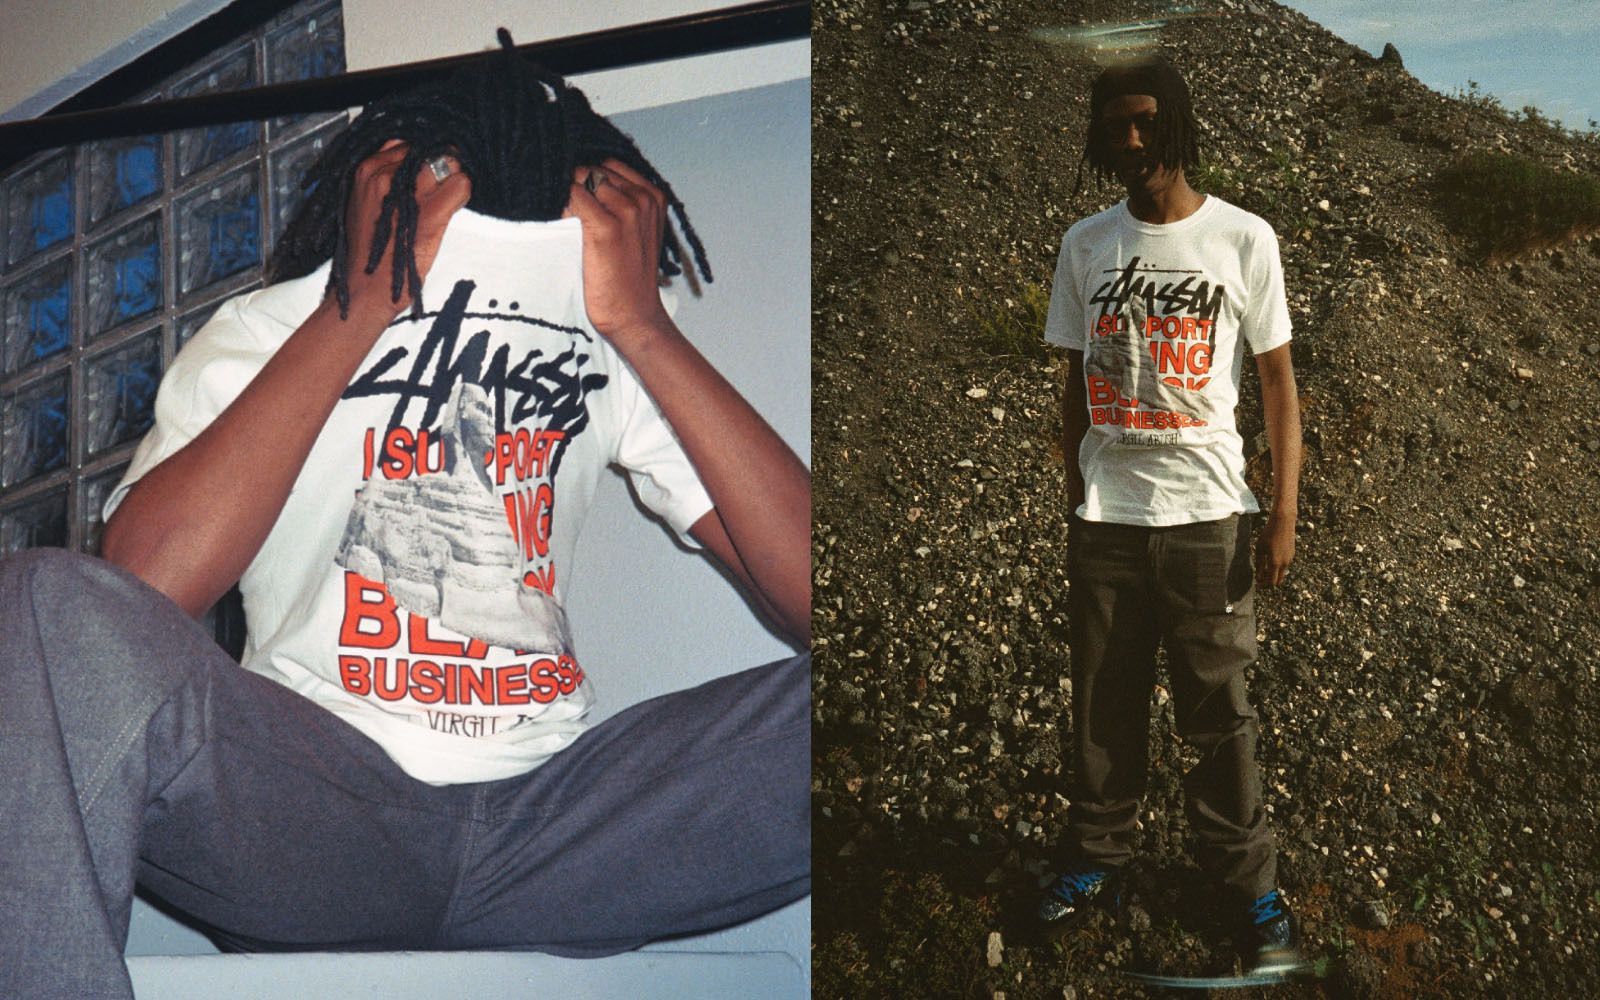 Off-White™ x Stüssy T-shirt to raise funds for the Black community